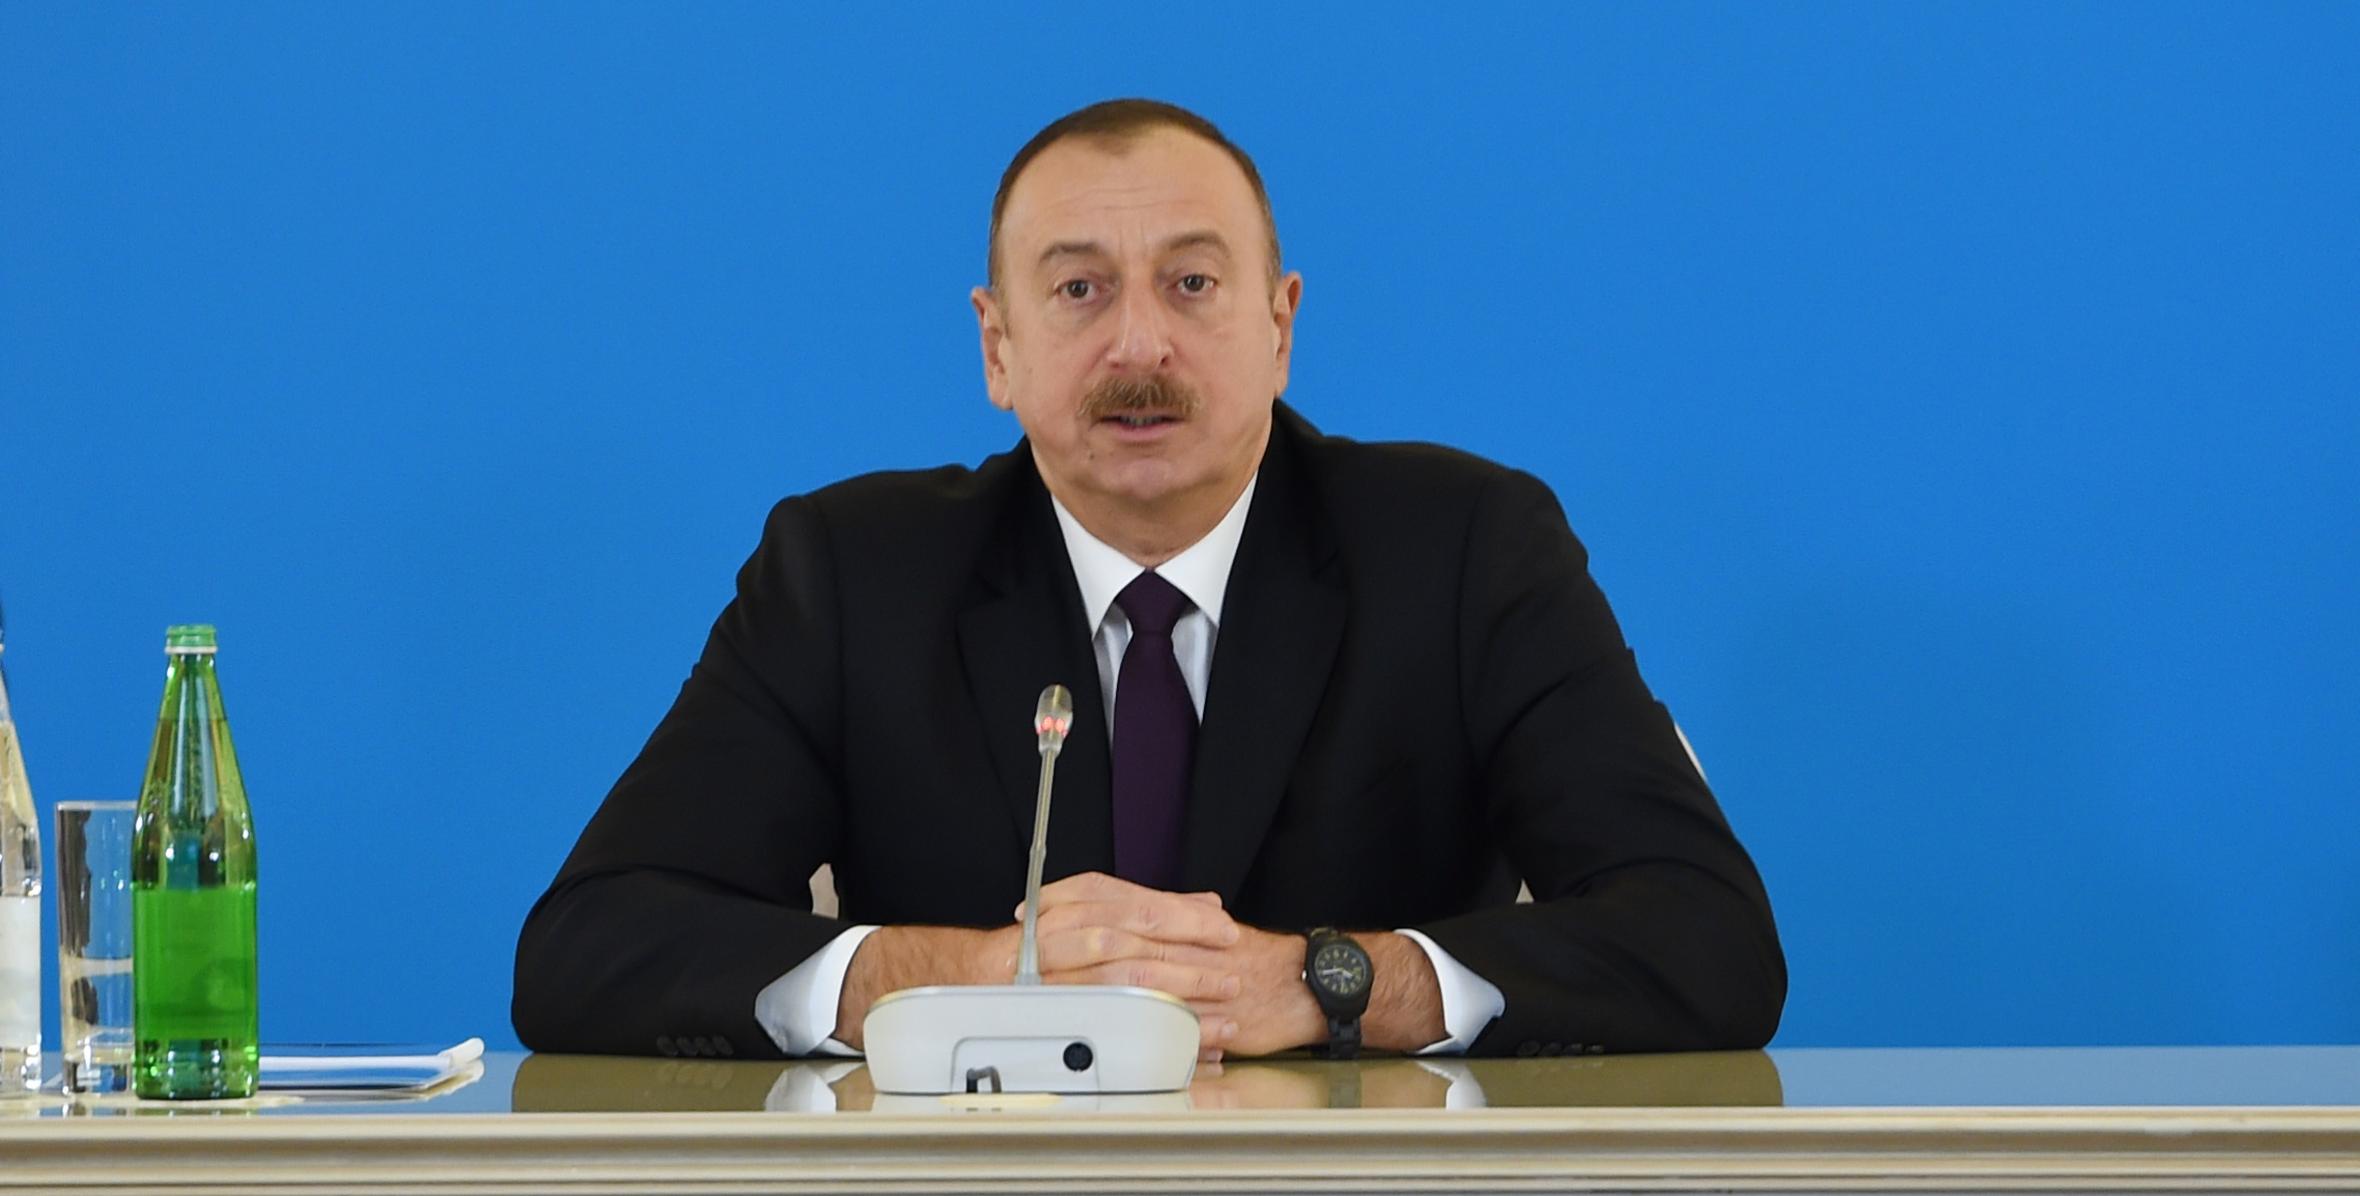 Speech by Ilham Aliyev at the third Ministerial Meeting of Southern Gas Corridor Advisory Council kicked off in Baku